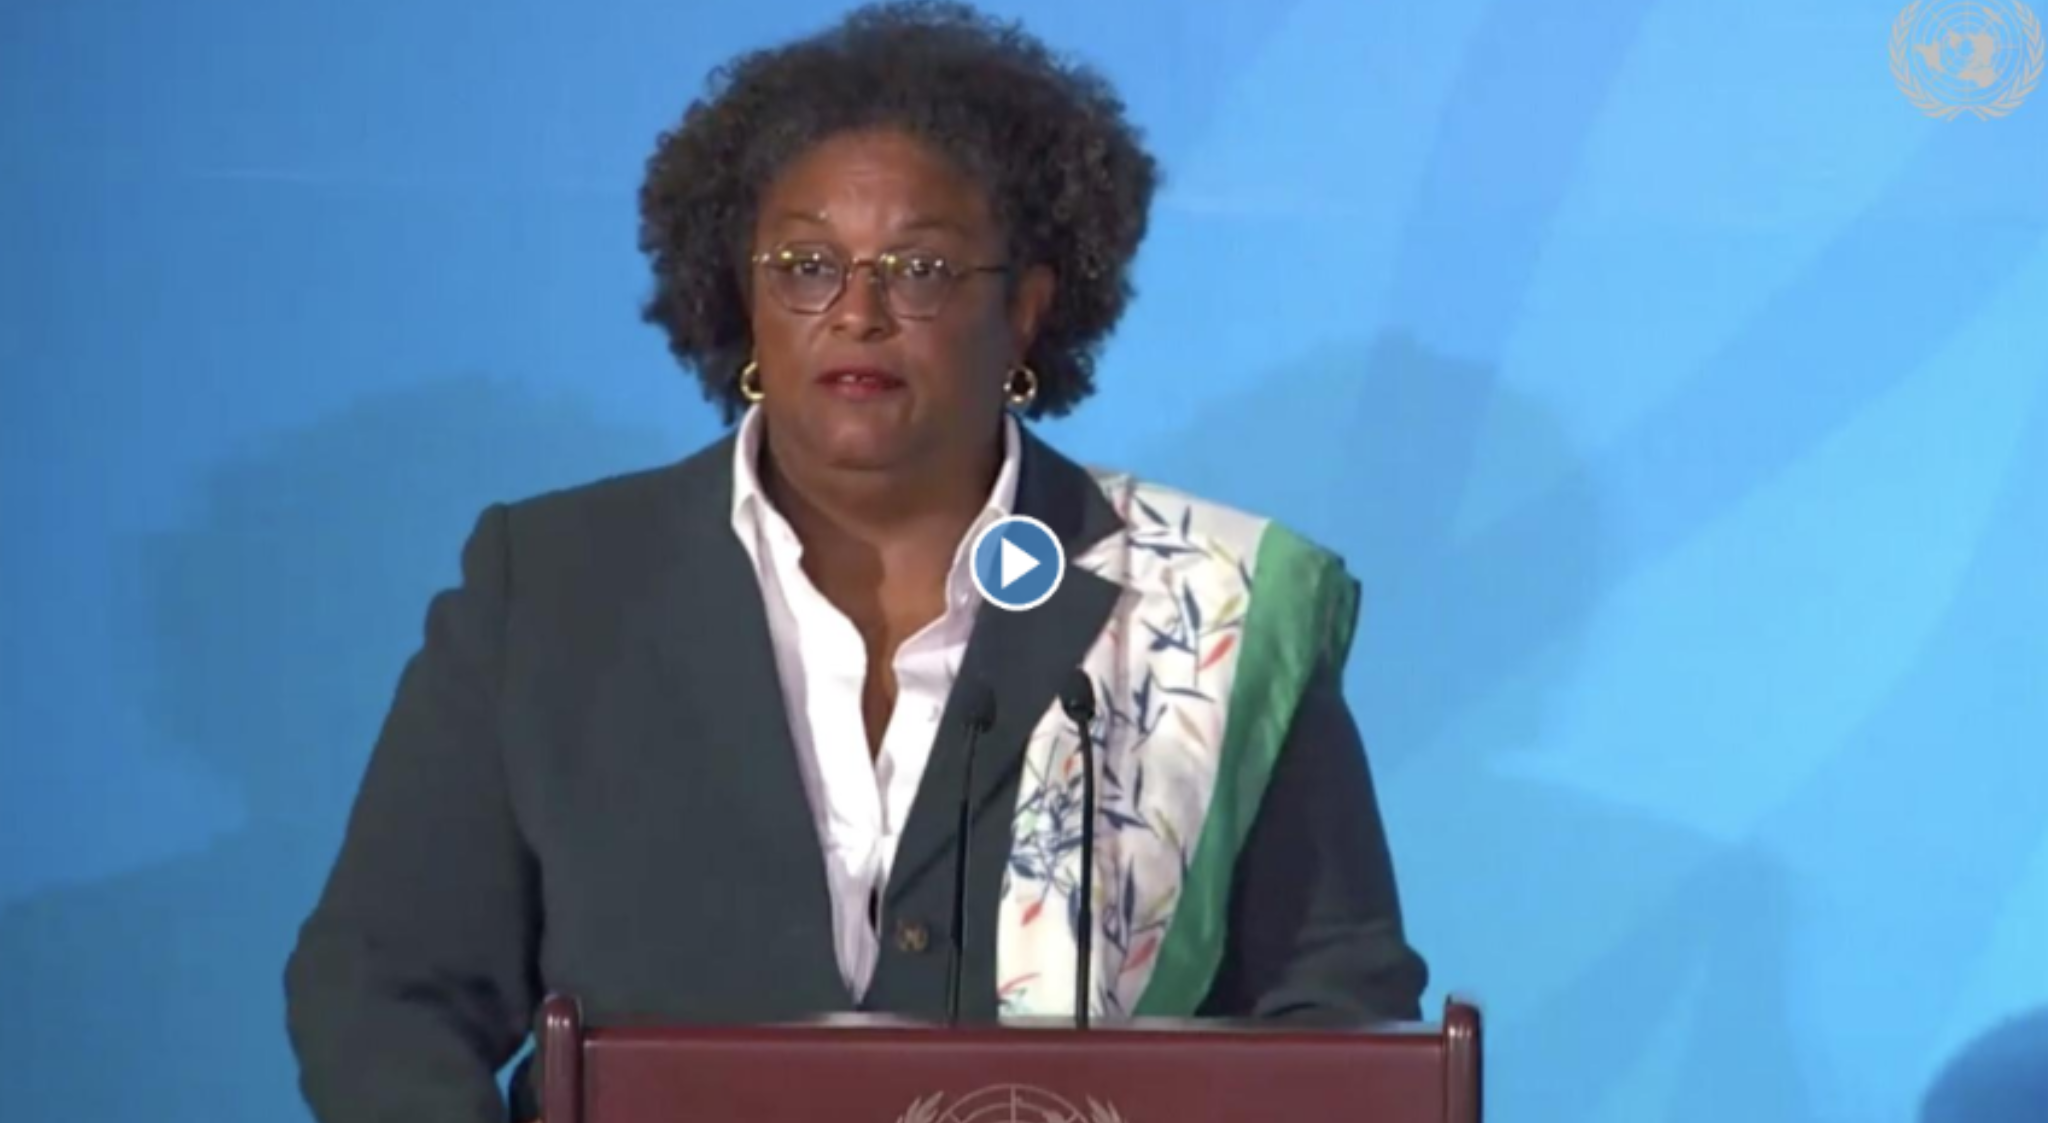 Barbados Prime Minister Warns The Caribbean Would Not Survive The Climate Crisis